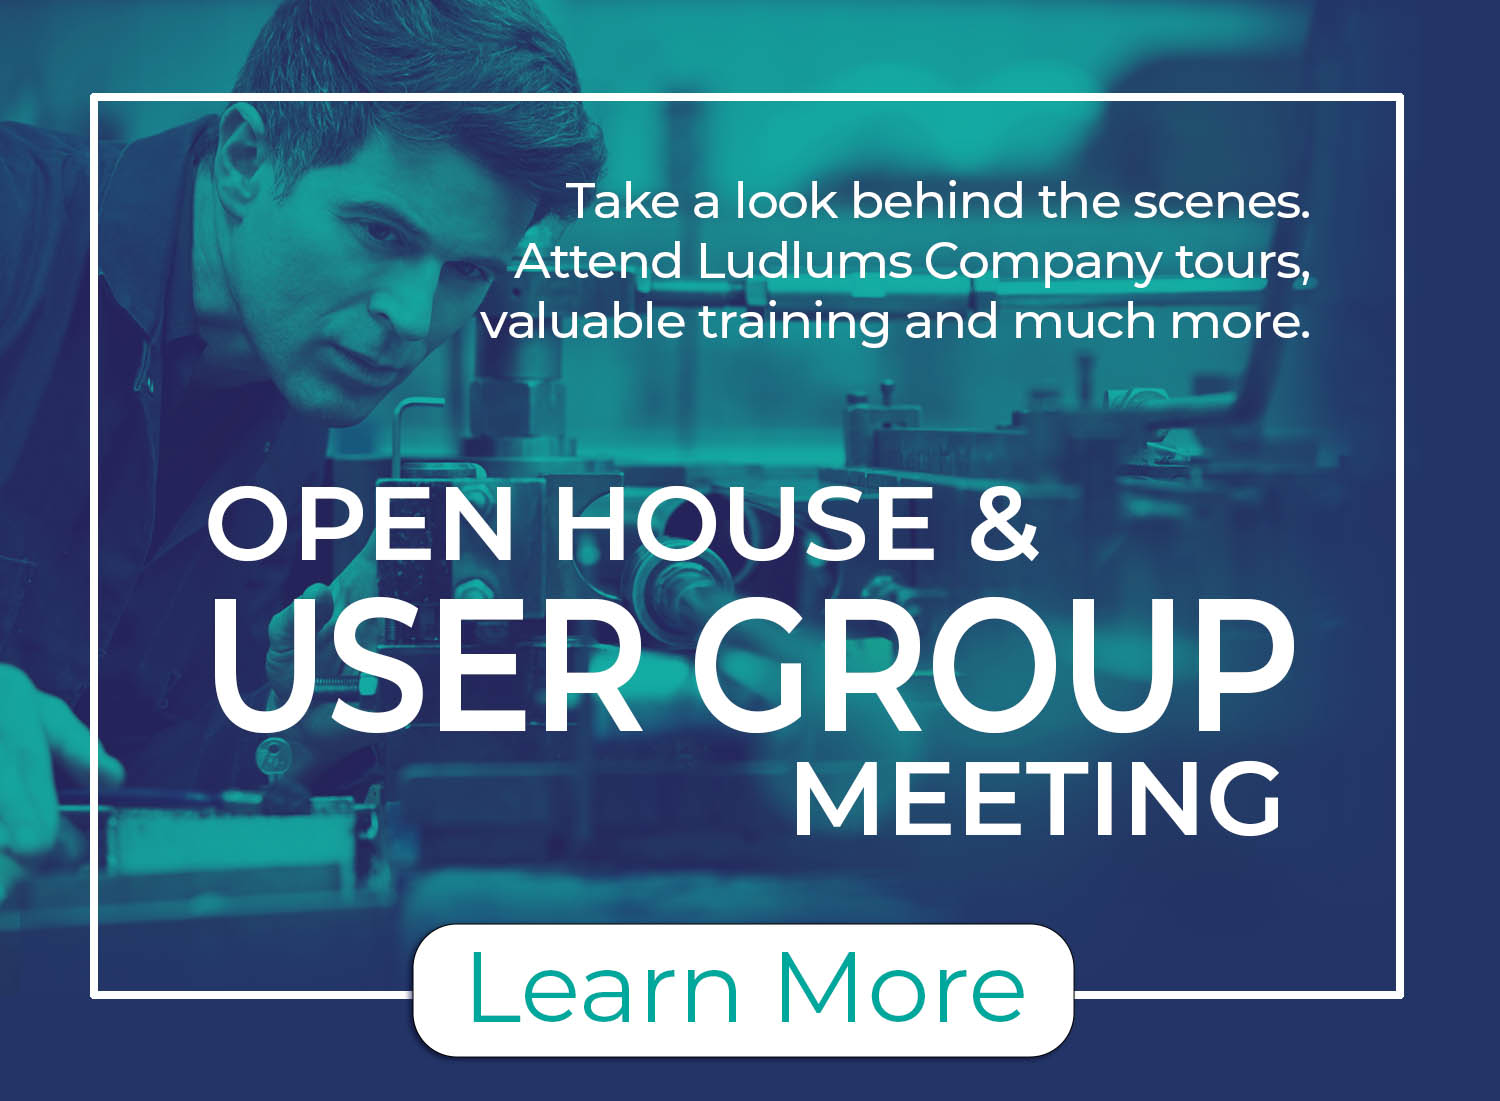 Open House & User Group Meeting - Take a look behind the scenes. Attend Ludlum Company tours, valuble training and much more.